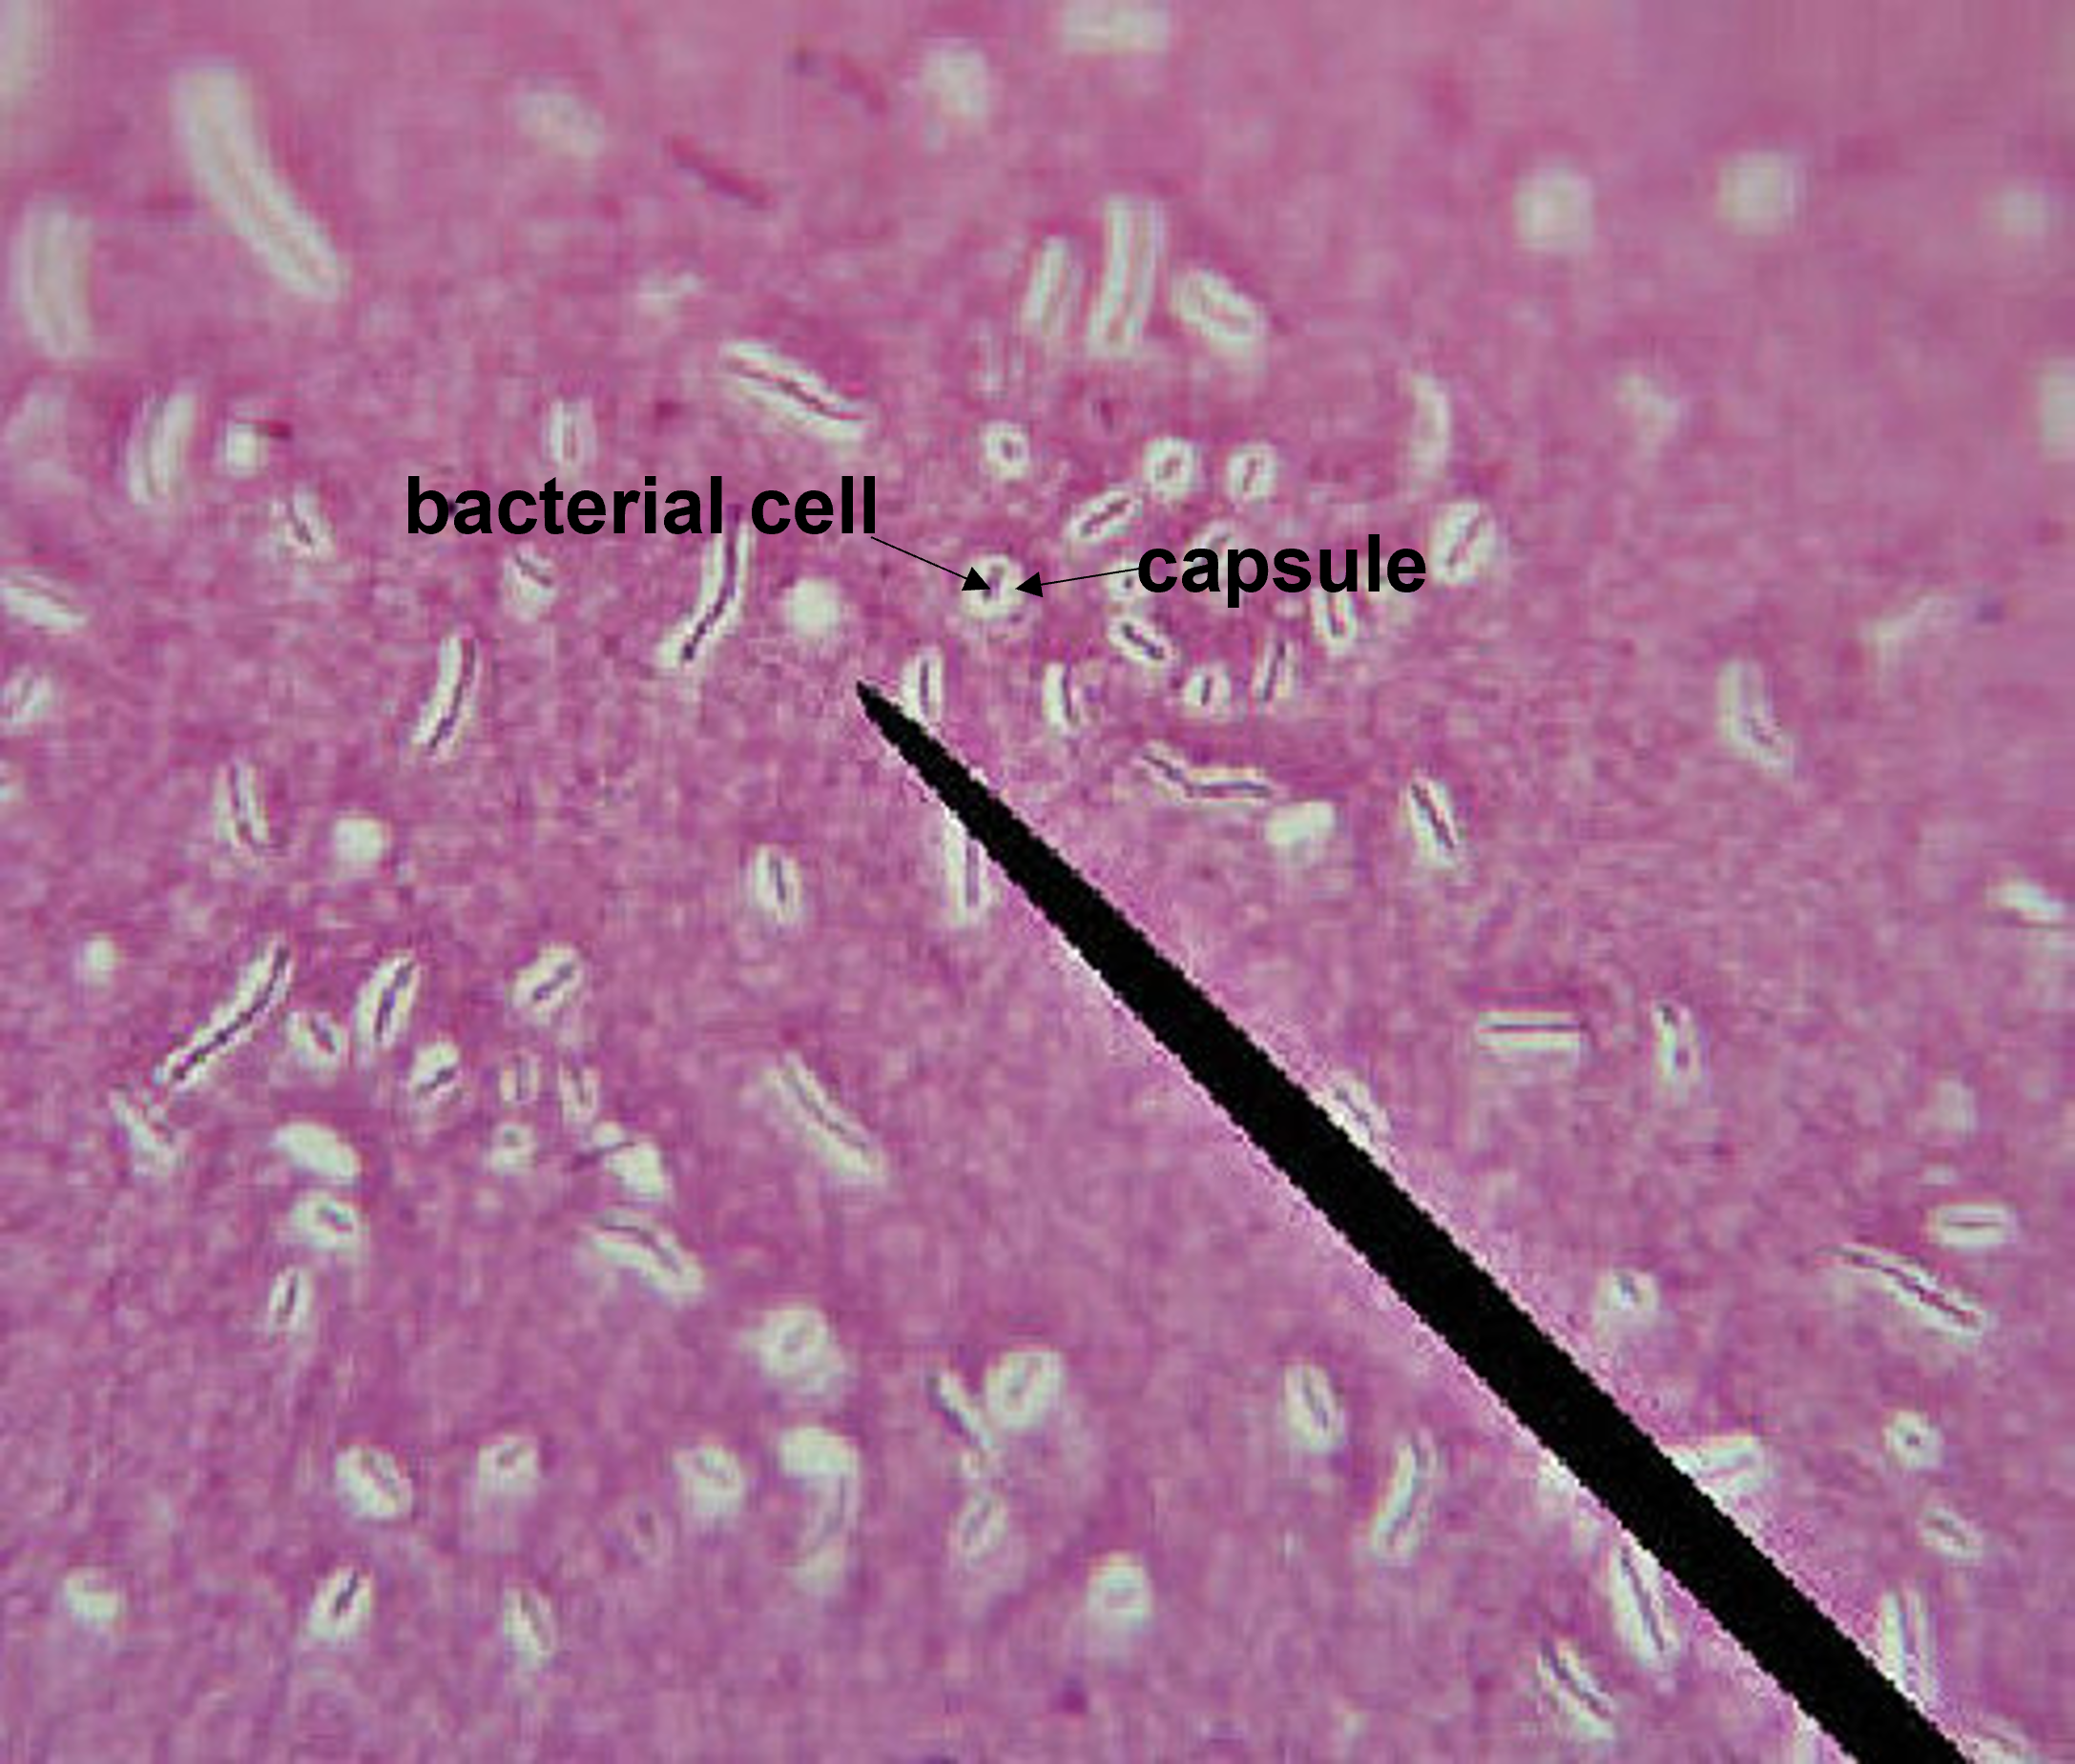 microscopic image of capsule stain with the capsule labeled